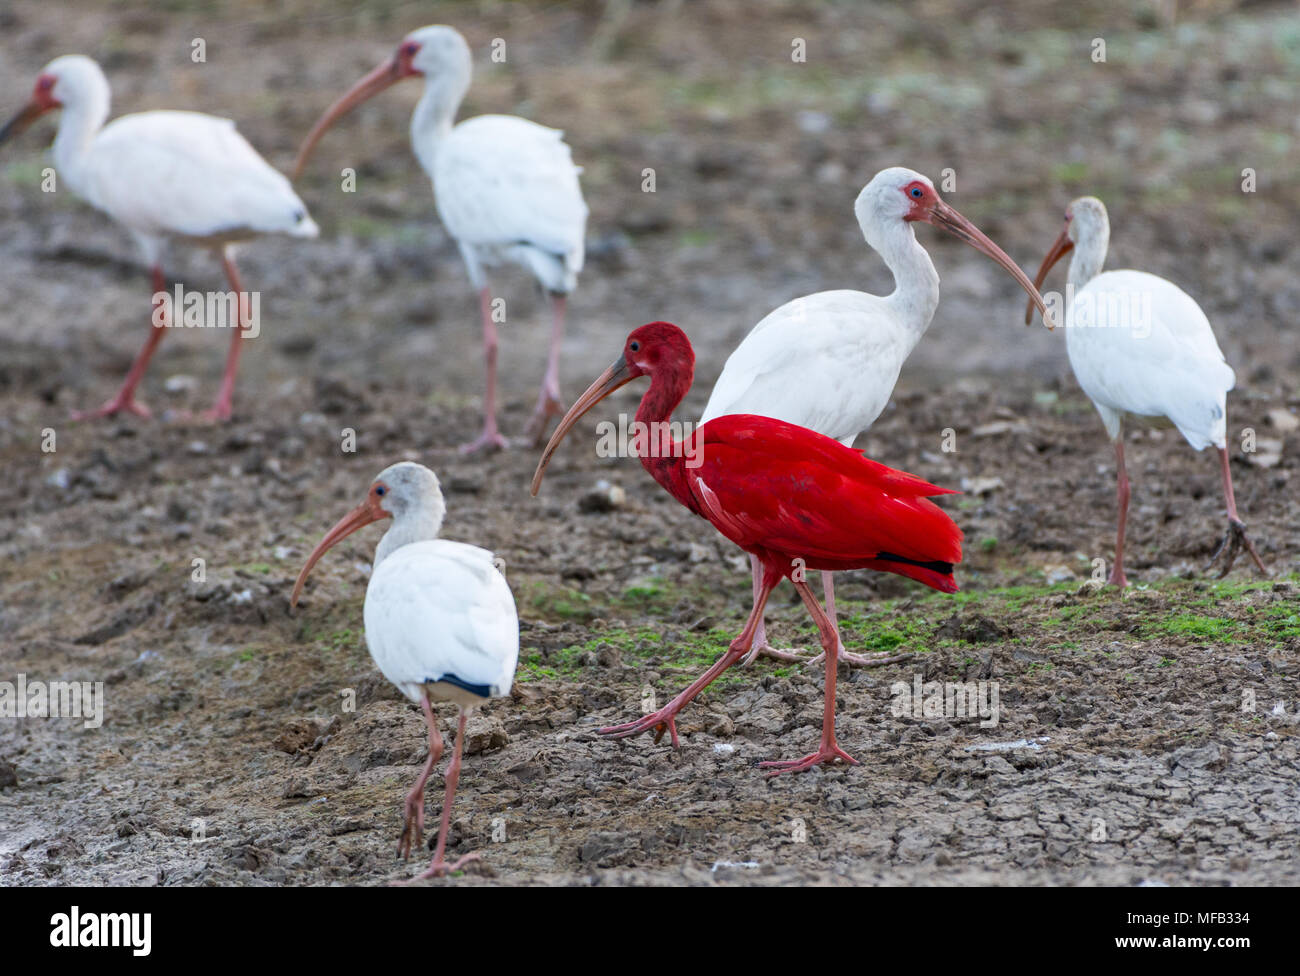 A Scarlet Ibis (Eudocimus ruber), mixed in a flock with White Ibis, foraging by a lake. Colombia, South America. Stock Photo